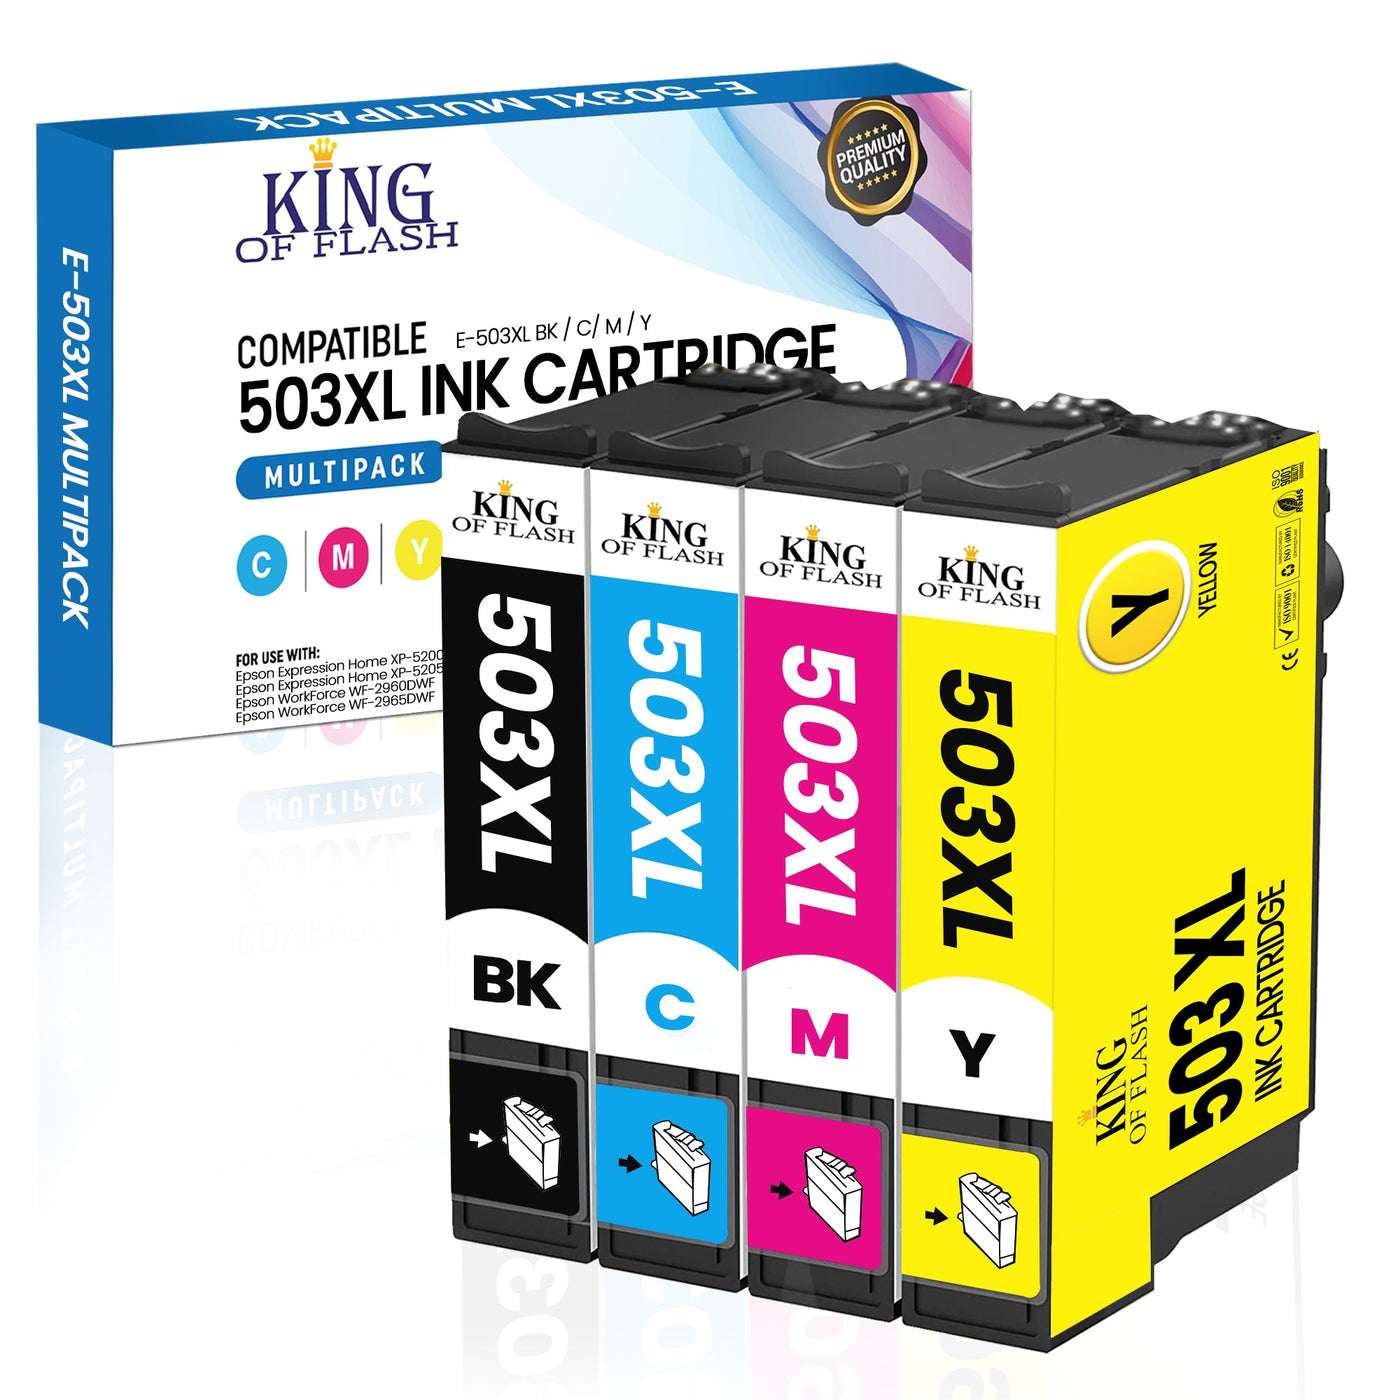 Compatible Epson 503xl Black Ink Cartridge Pack Of 4 — King Of Flash Uk 2664